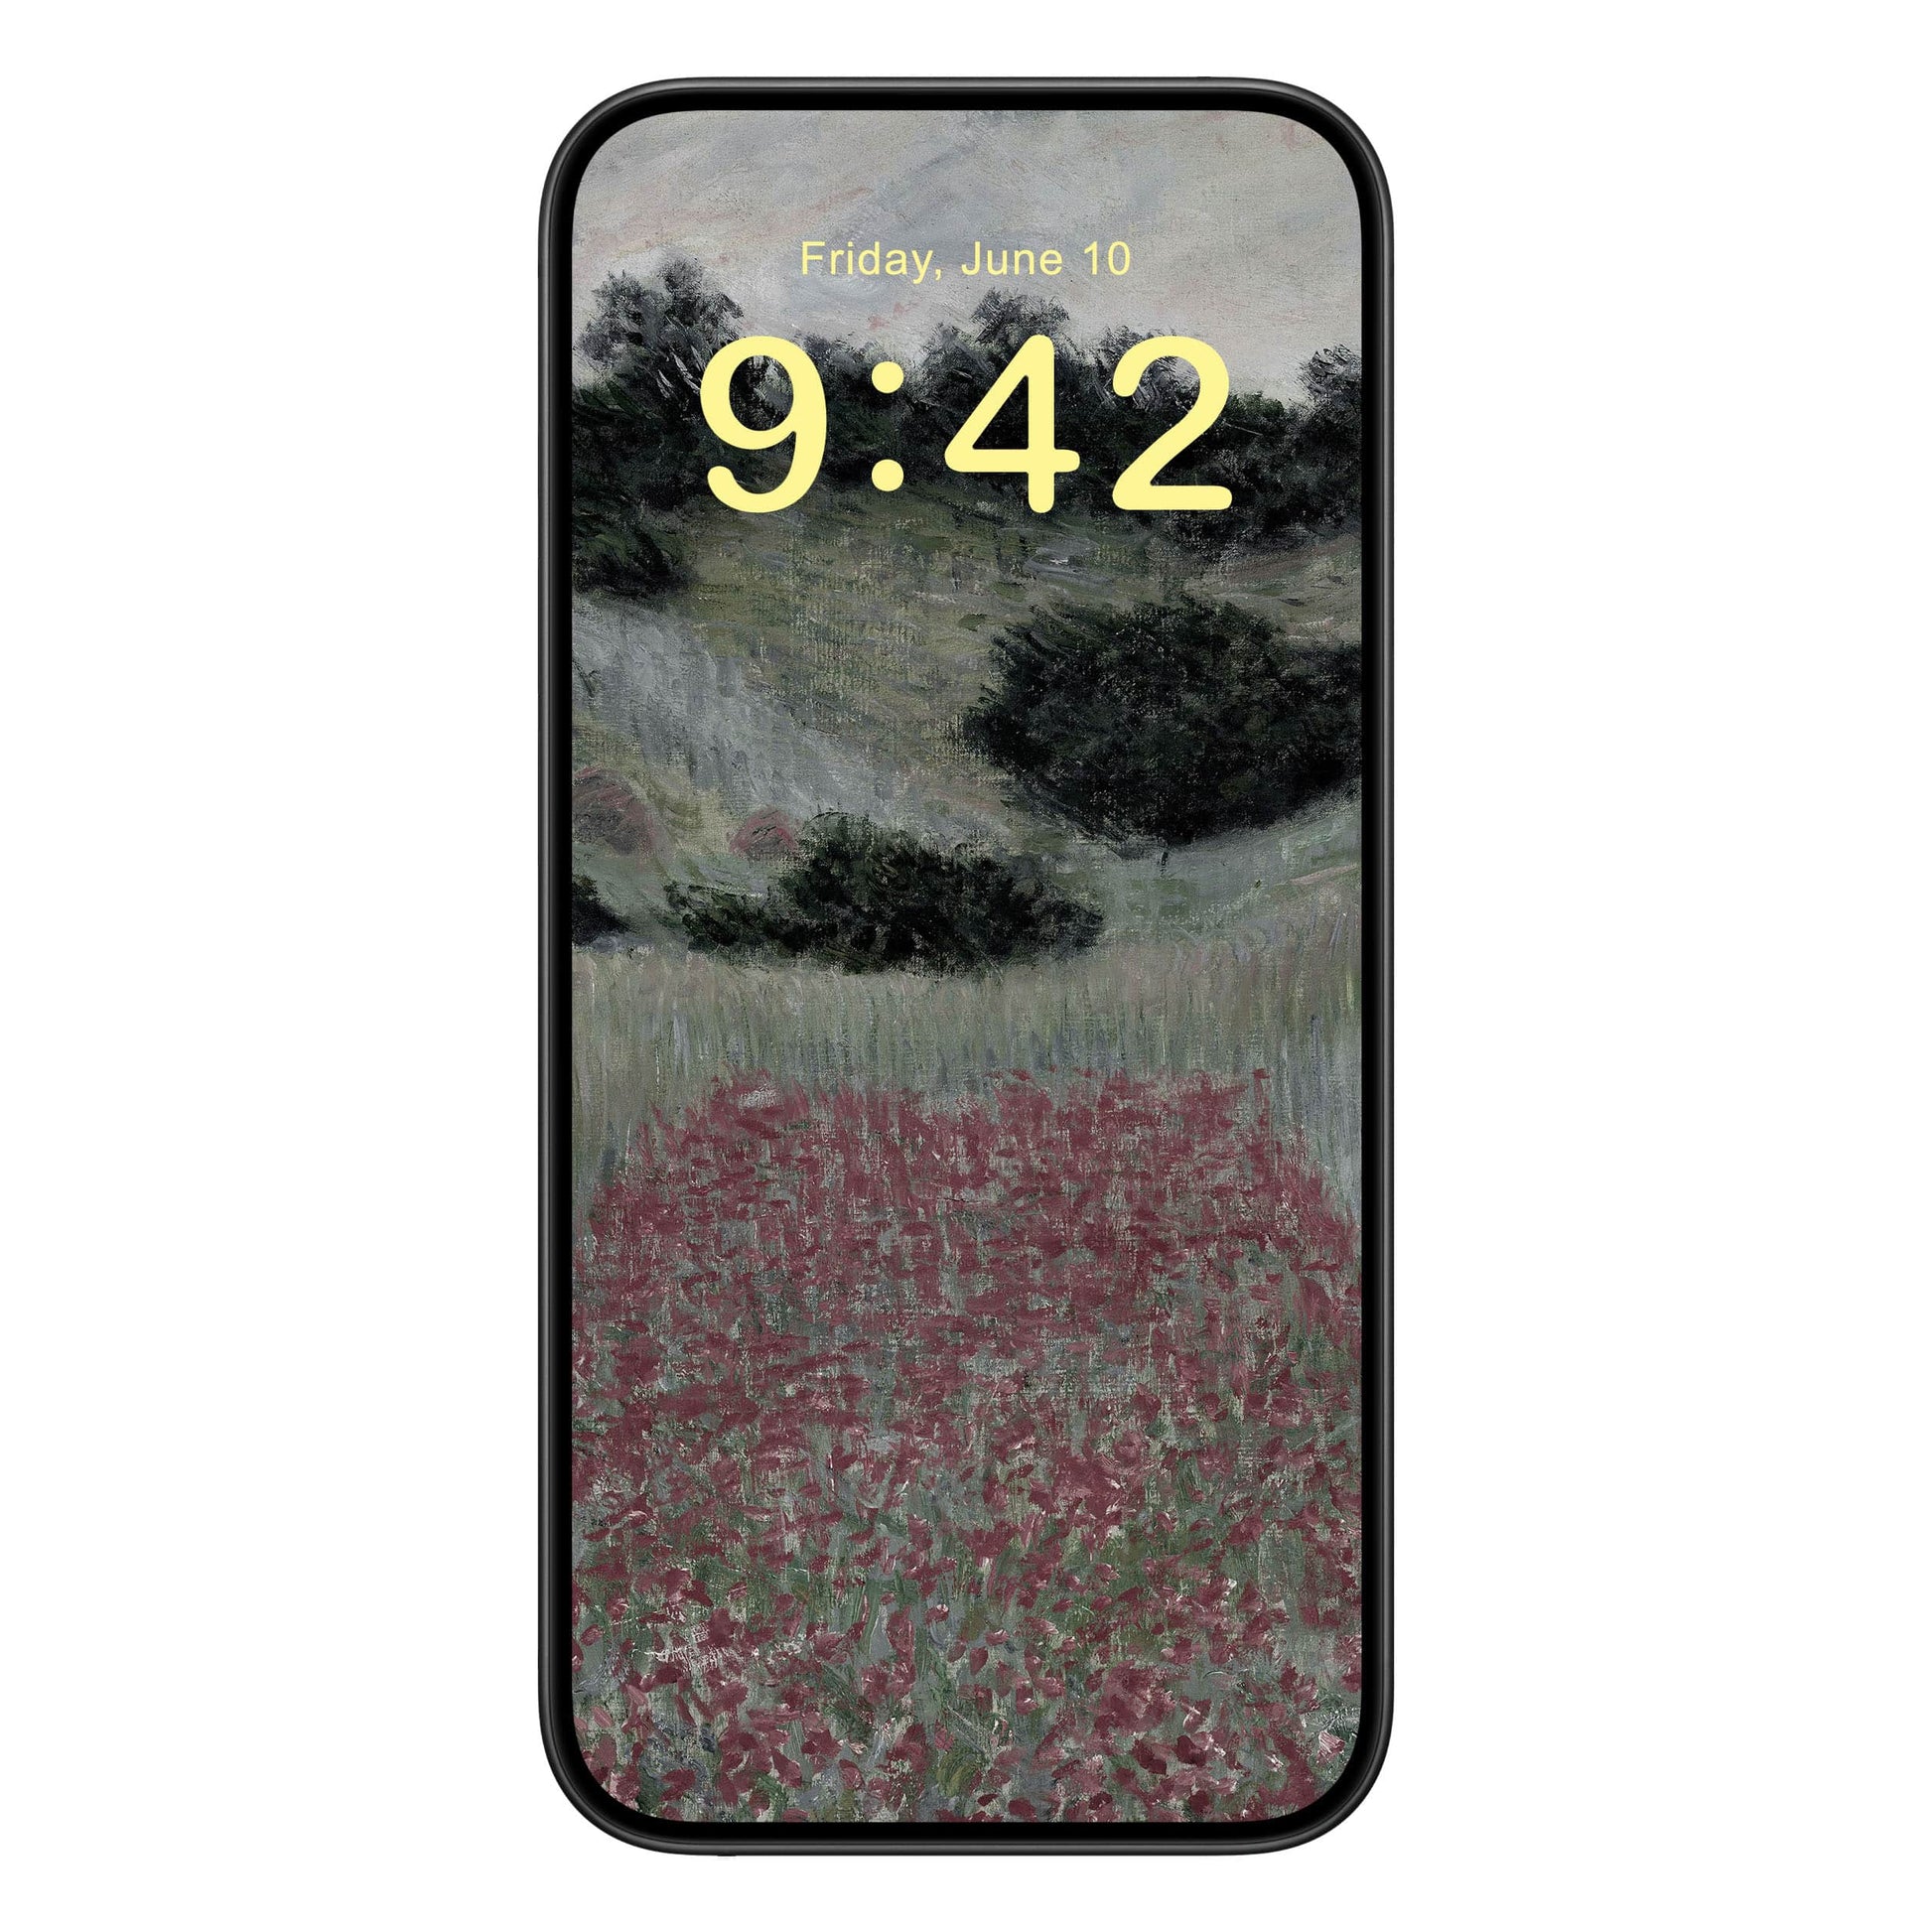 Muted Floral Landscape Phone Wallpaper Yellow Text